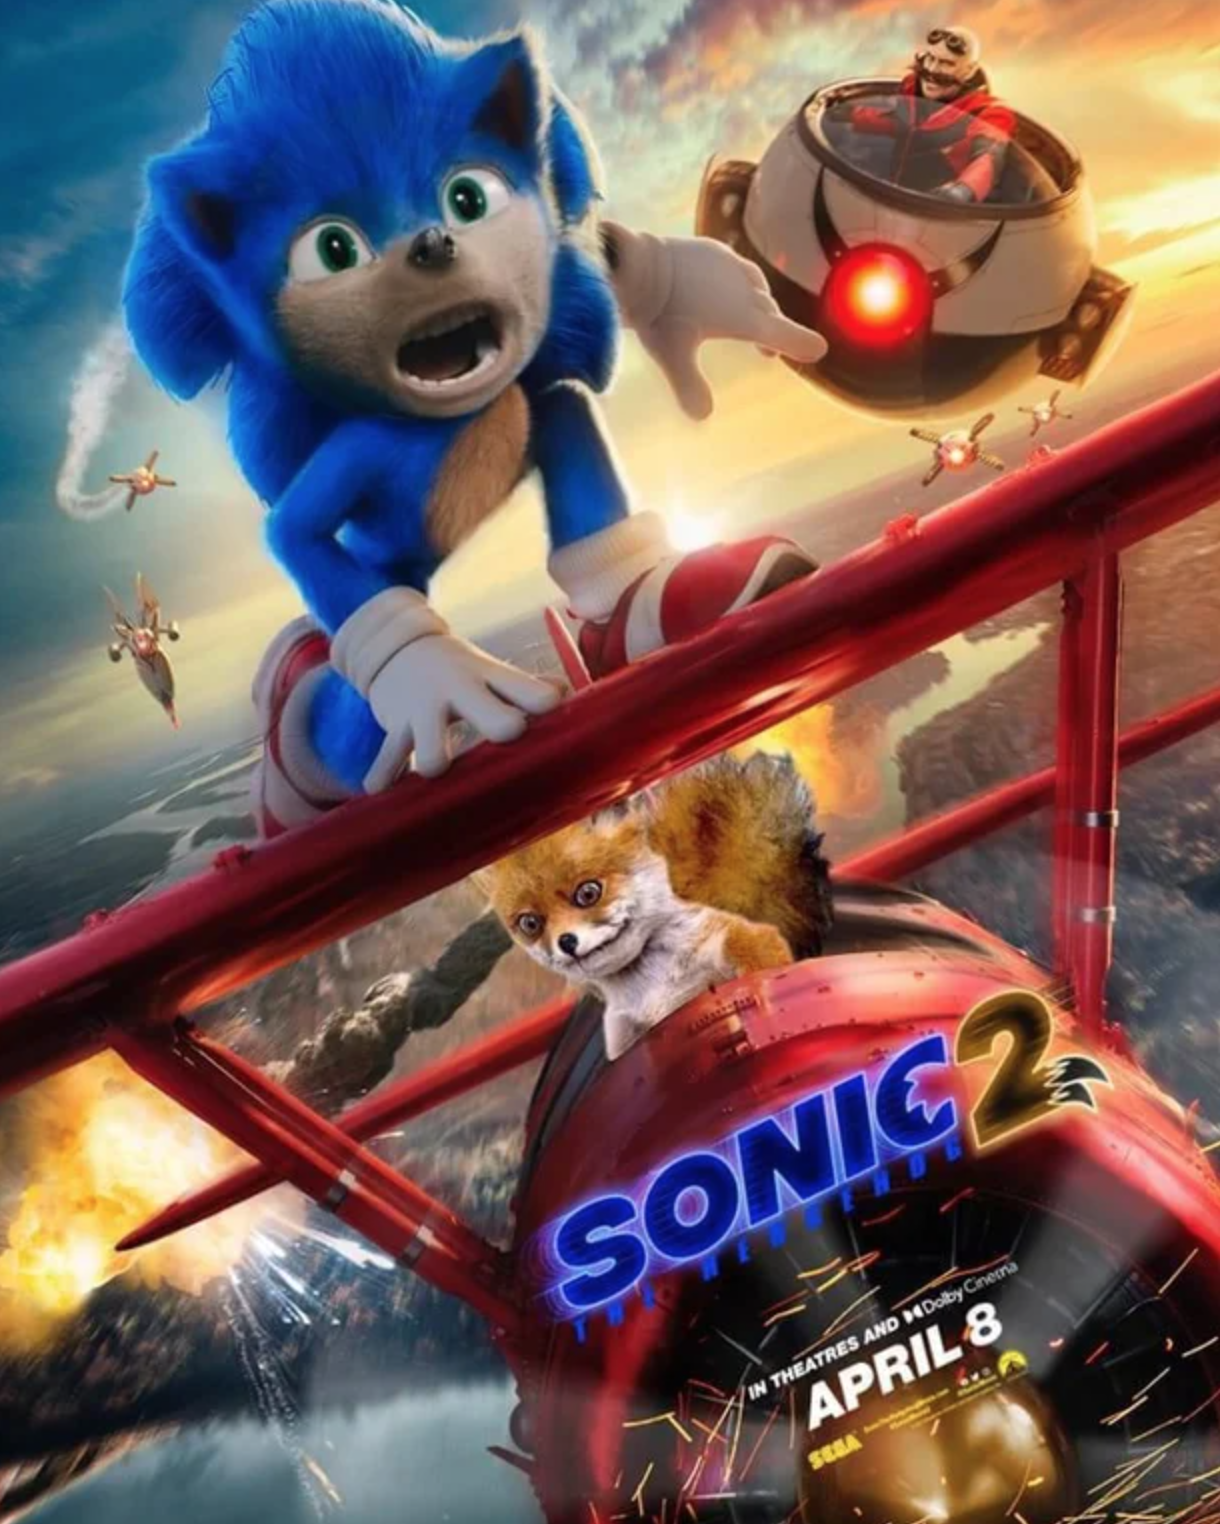 funny gaming memes - sonic the hedgehog 2 poster - SONIC2 Theatres And Noc A April 8